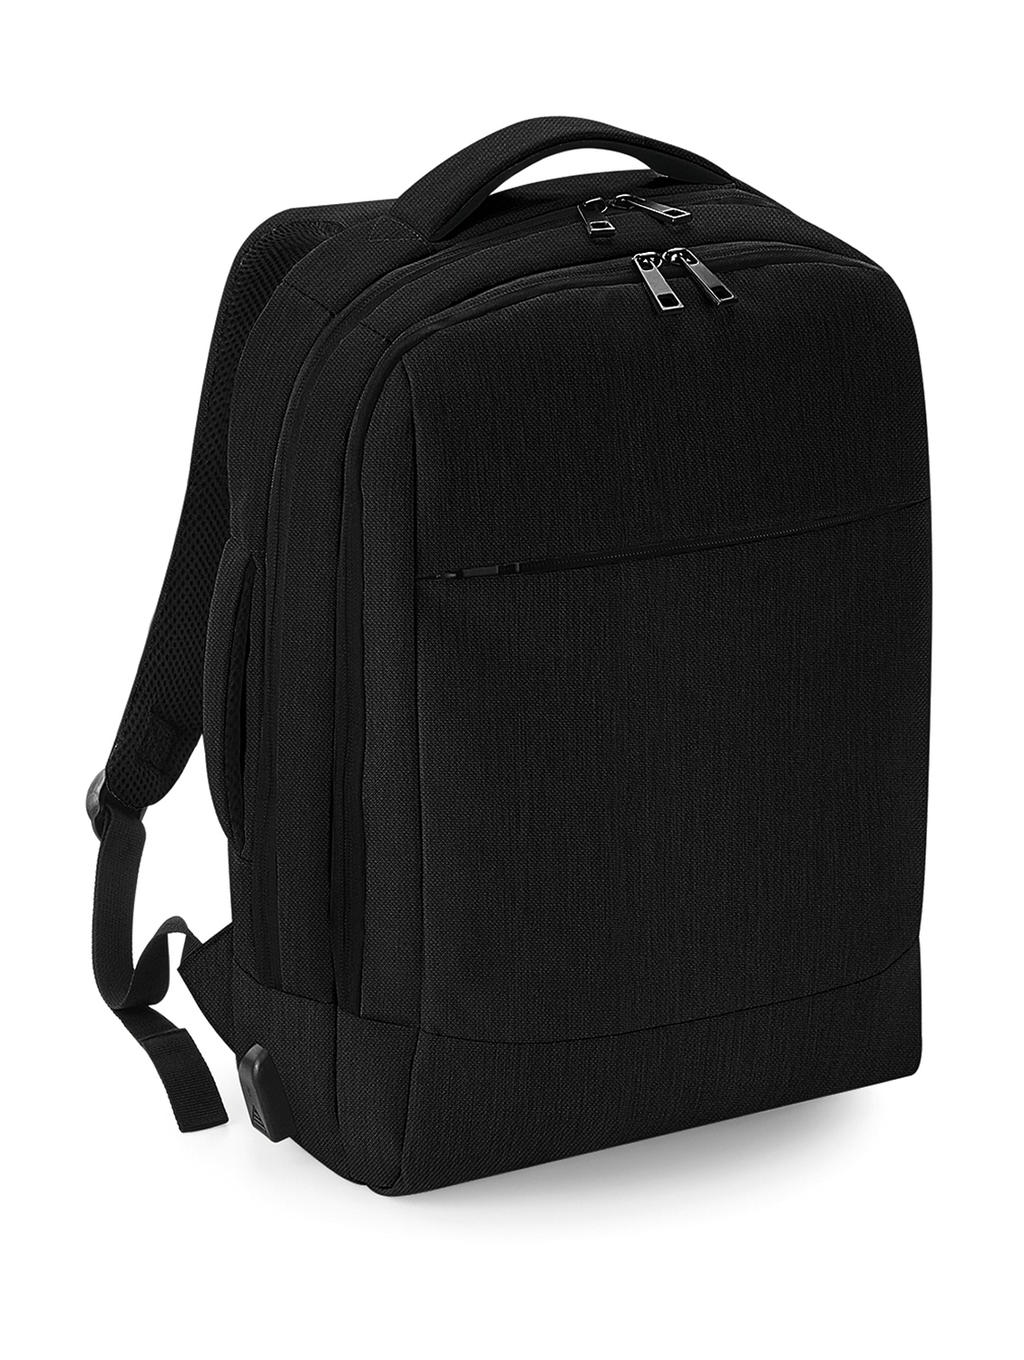  Q-Tech Charge Convertible Backpack in Farbe Black